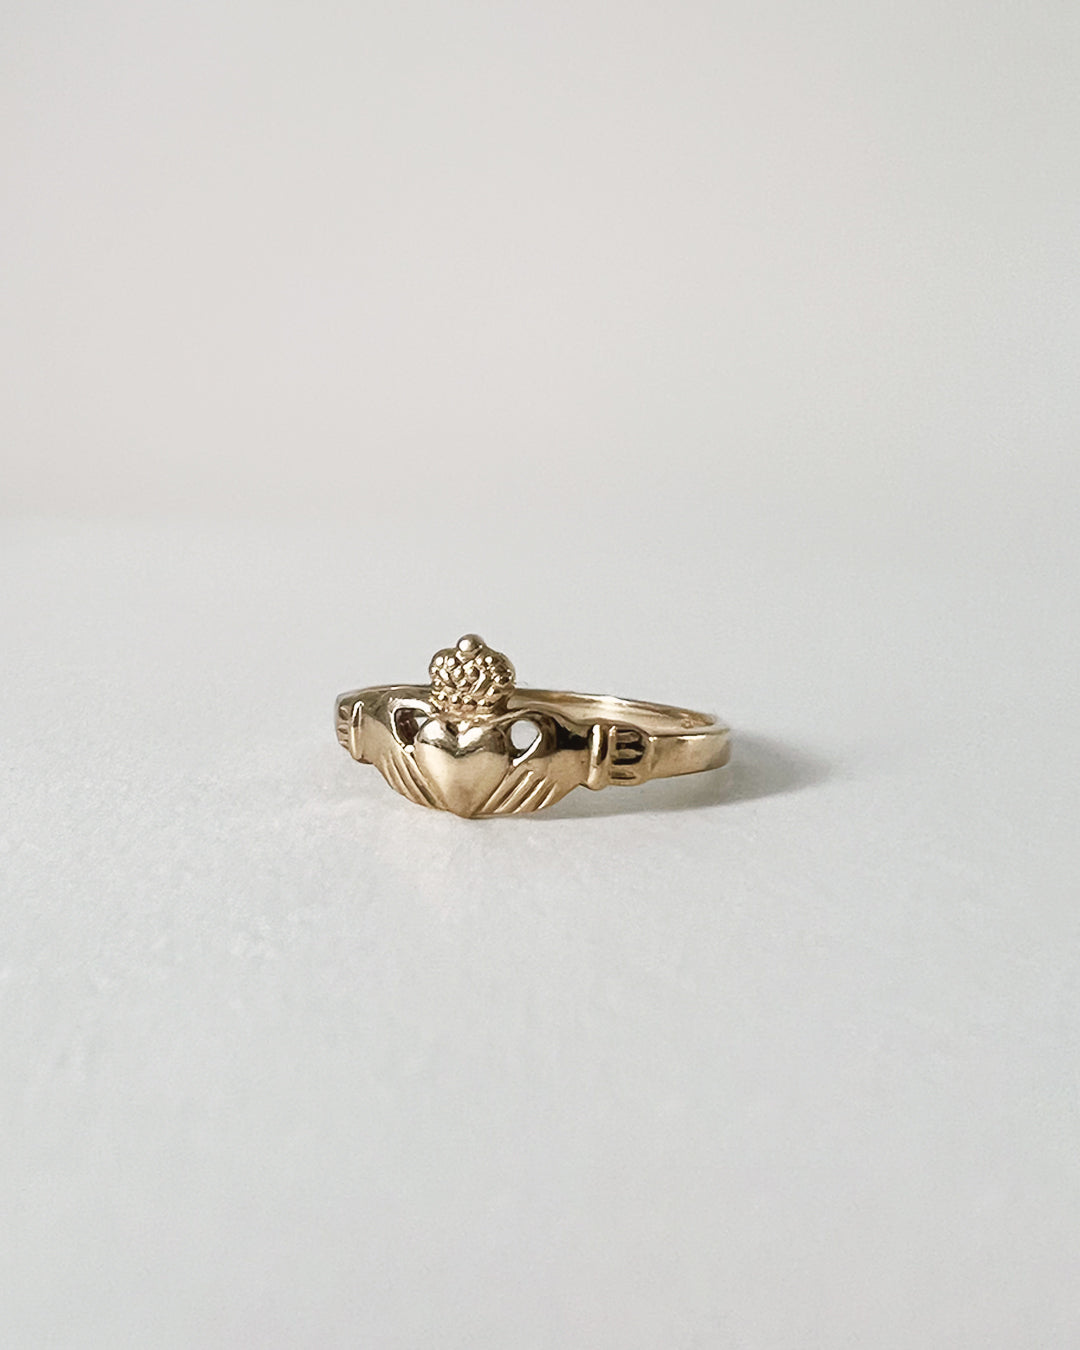 SOLID YELLOW GOLD CLADDAGH RING, 9CT GOLD RING